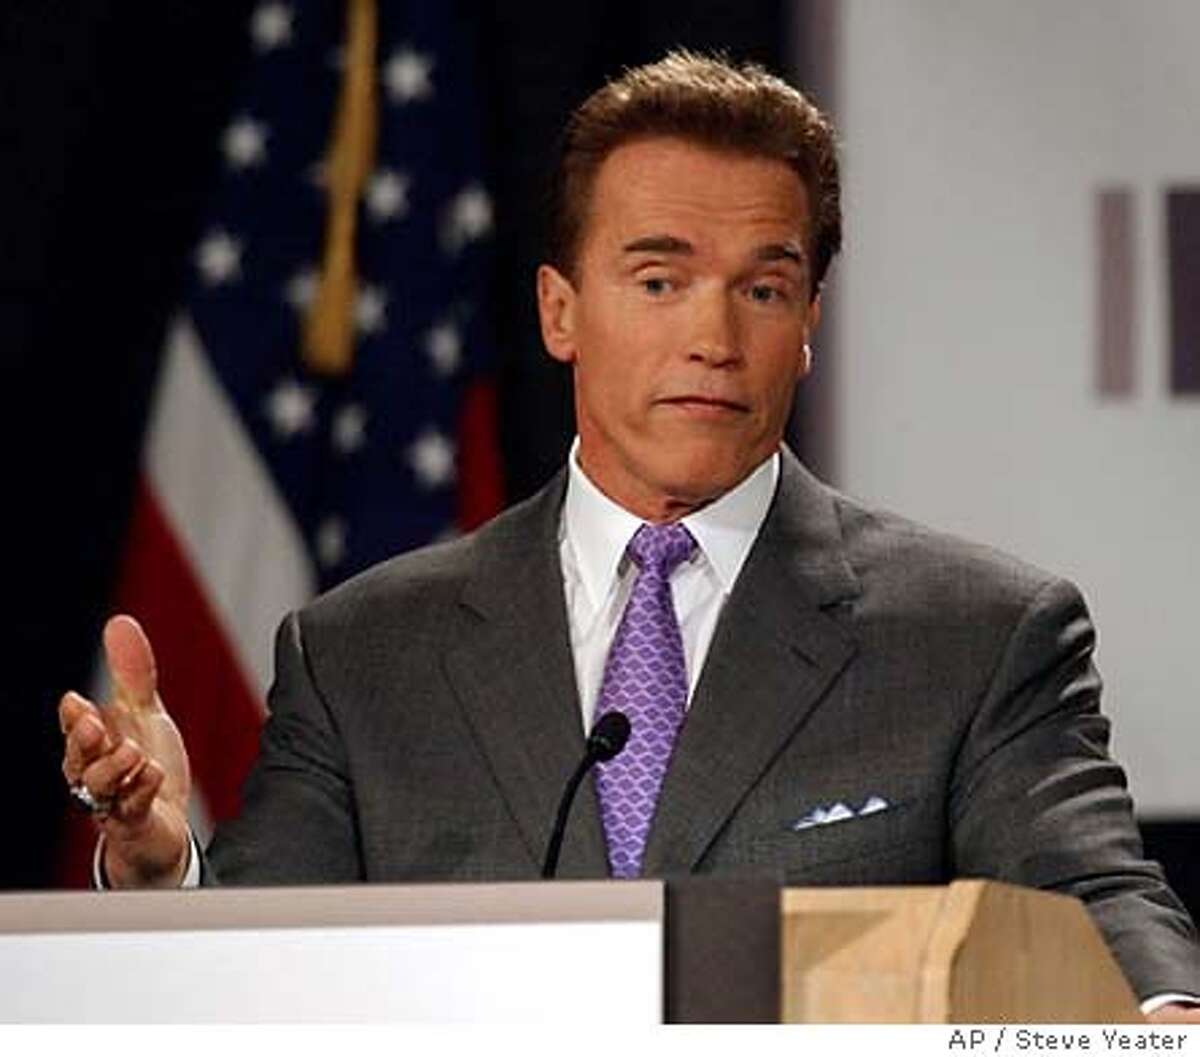 Gov. Arnold Schwarzenegger answers a question from a reporter after speaking at the Sacramento Press Club's luncheon in Sacramento, Calif., on Tuesday, Jan. 27, 2004. The Governor talked about a variety of issues before answering questions from the audience.(AP Photo/Steve Yeater)